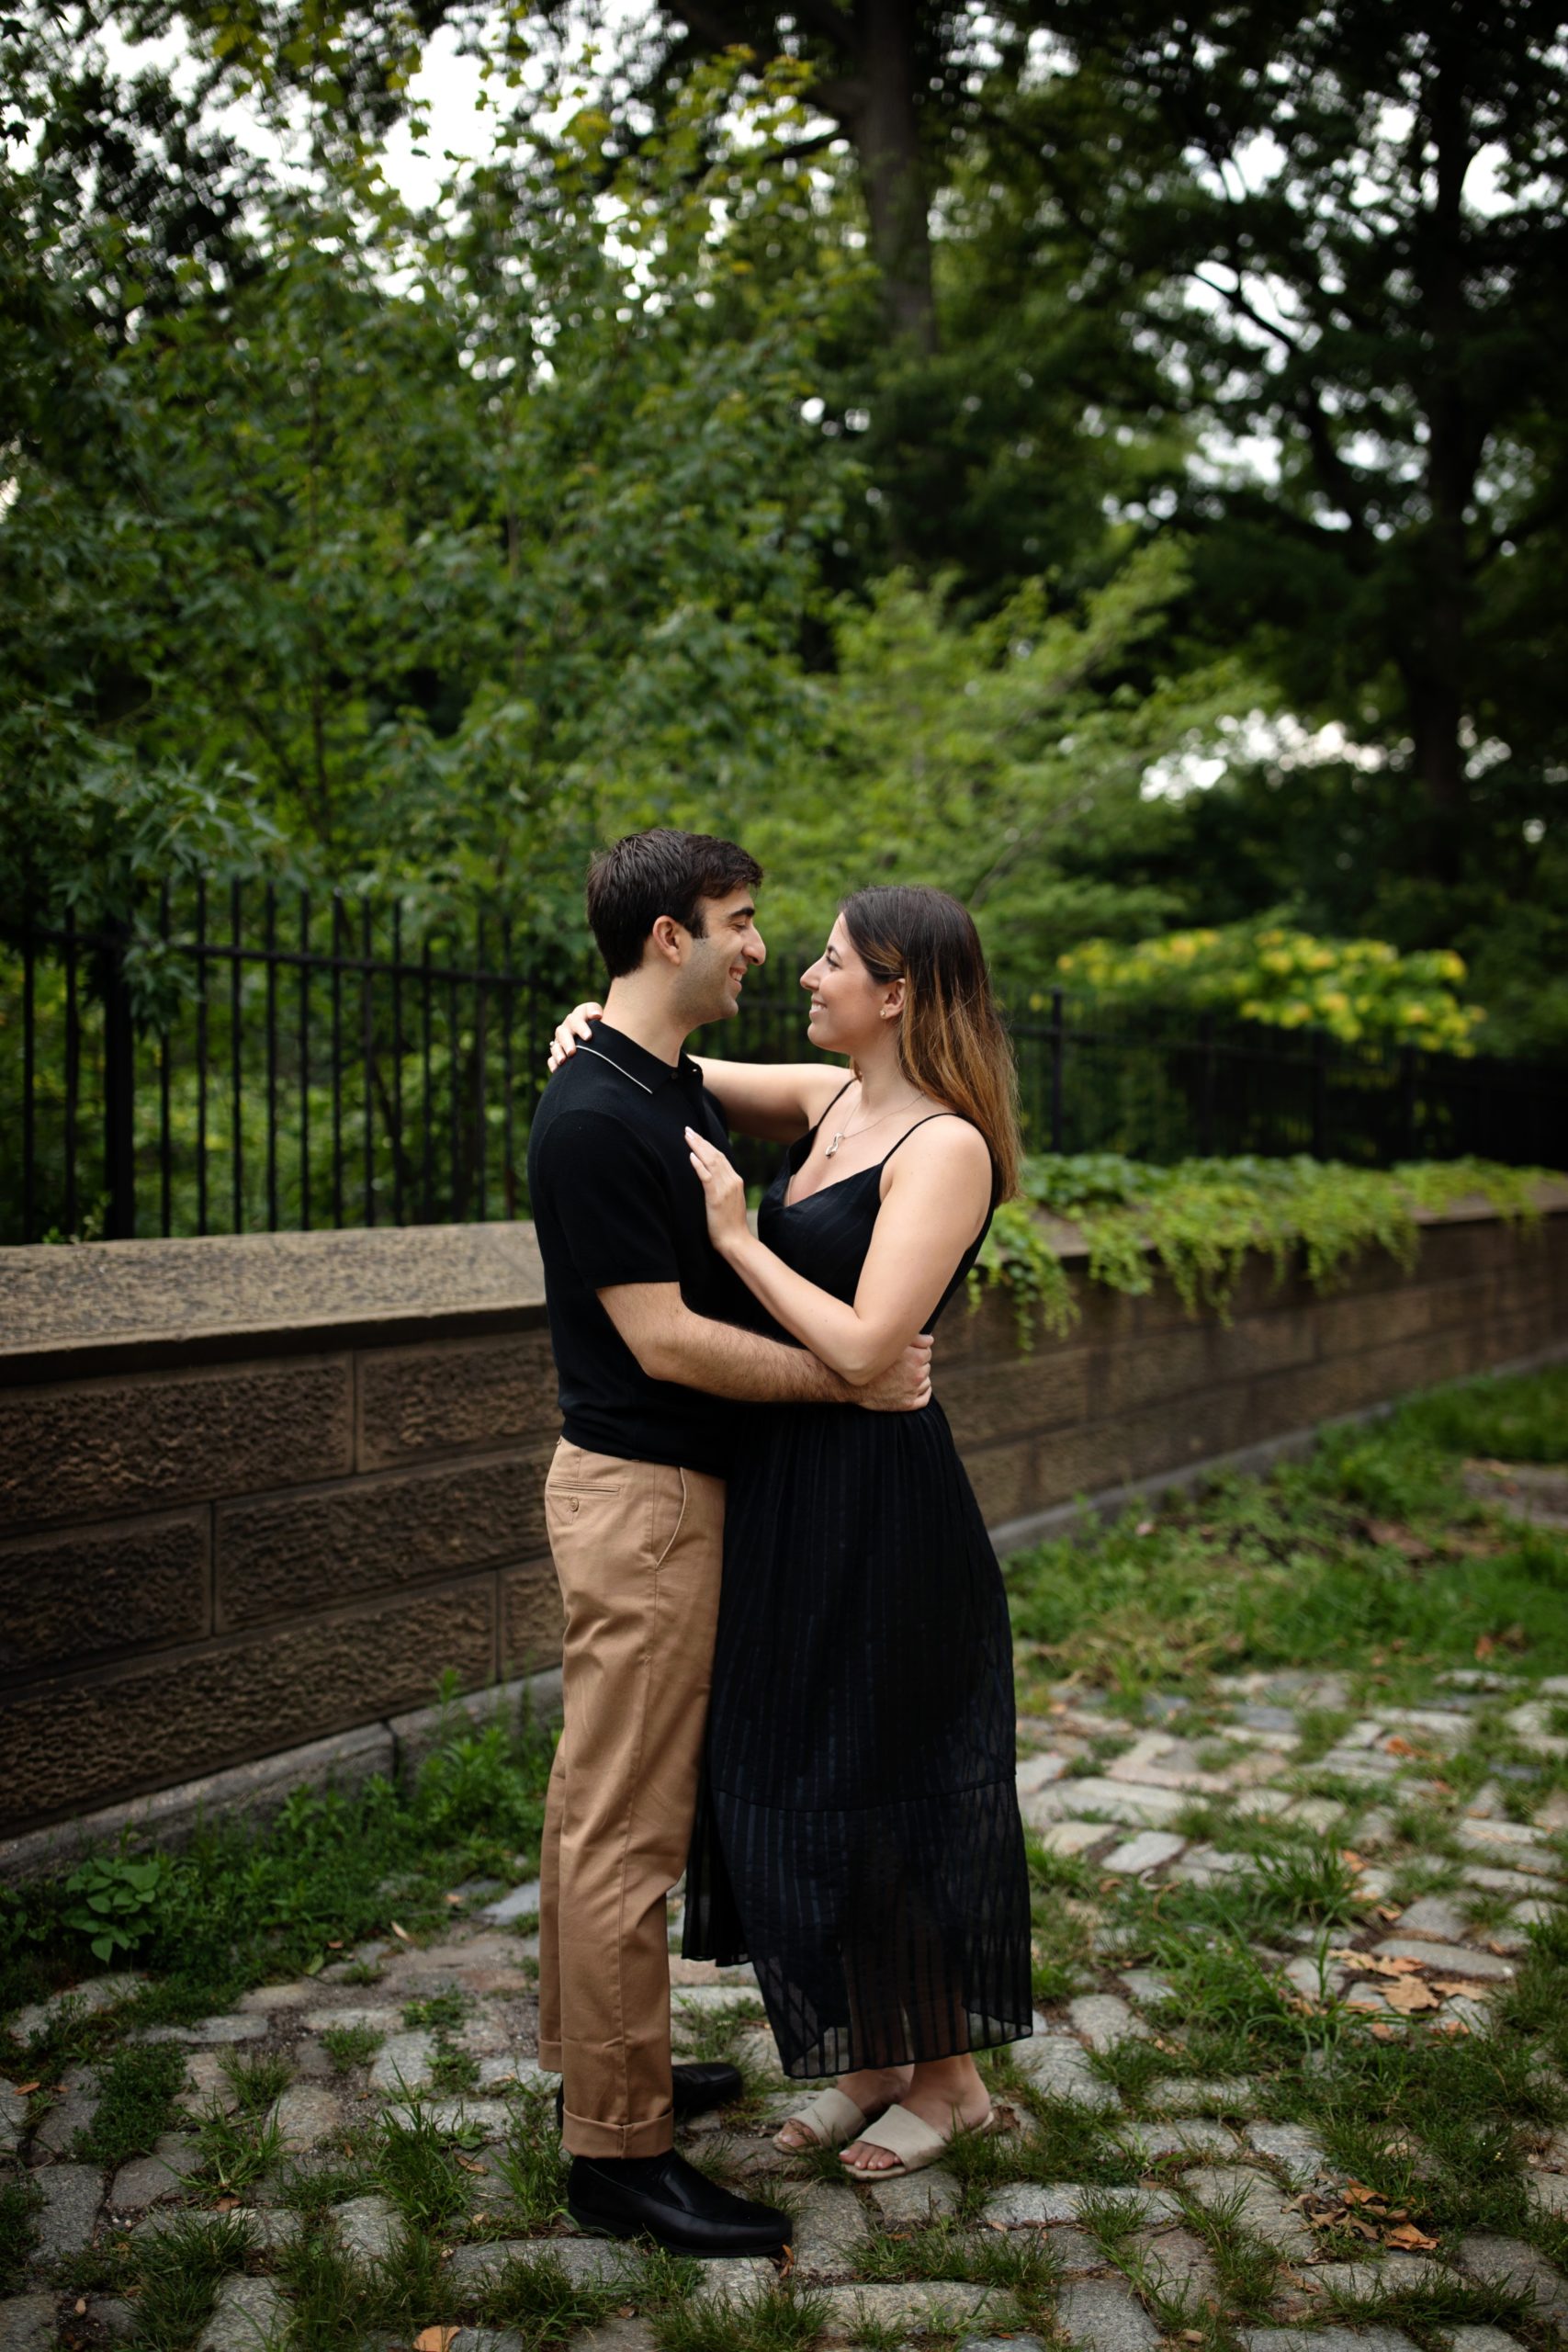 Central Park New York City Summer Romantic Chic Engagement Photos, captured by New York City Engagement and Wedding Photographers Janae Rose Photography